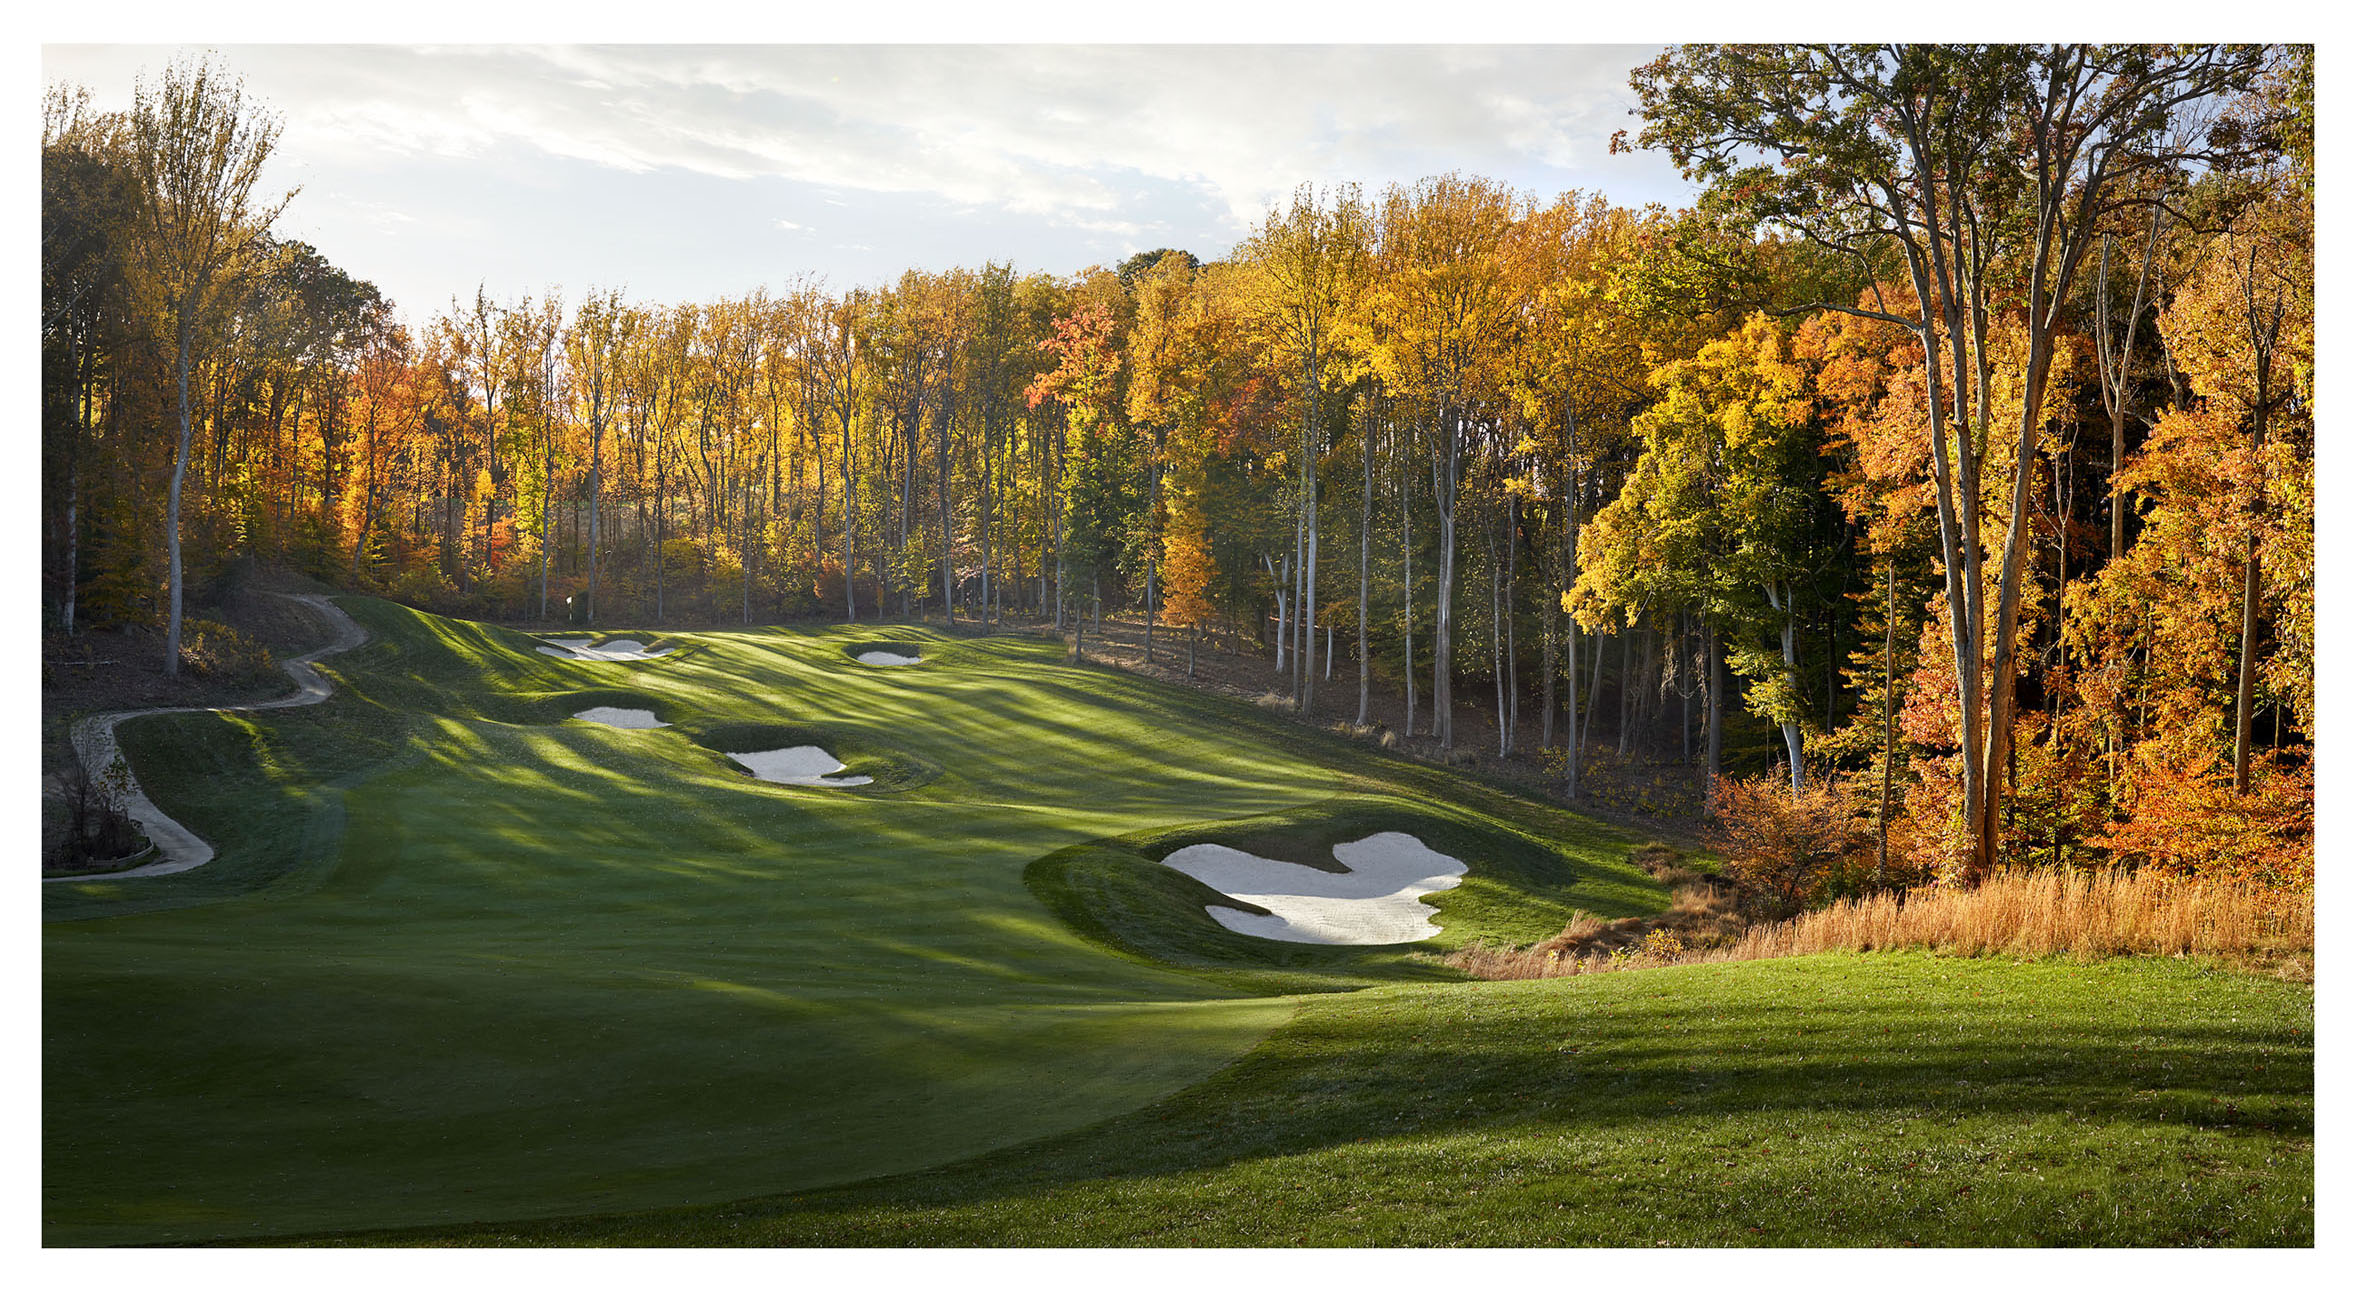 A golf course surrounded by trees with fall foliage